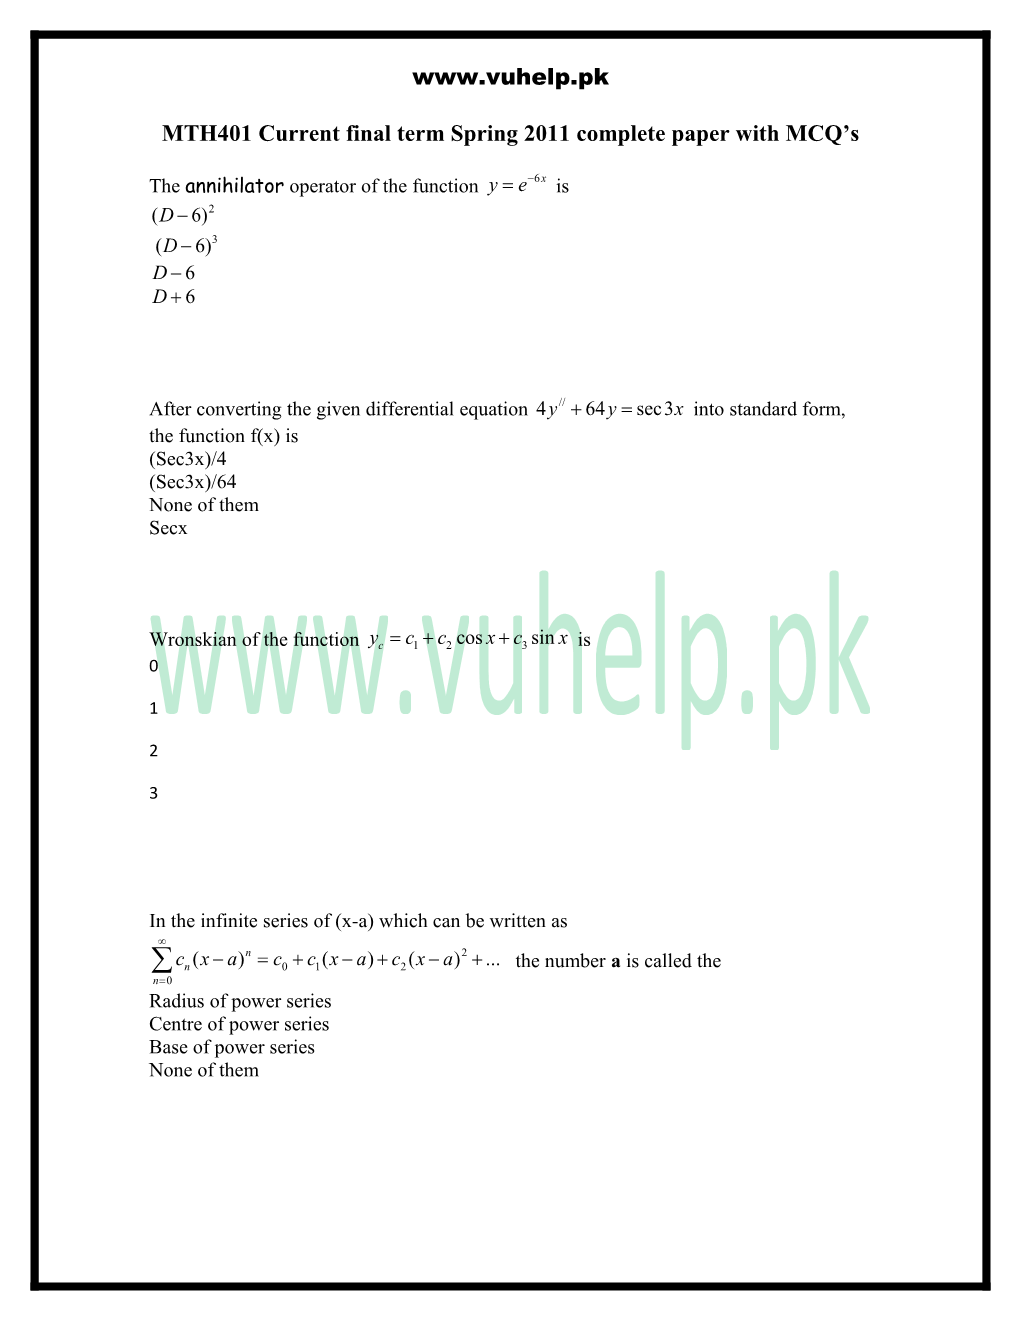 MTH401 Current Final Term Spring 2011 Complete Paper with MCQ S